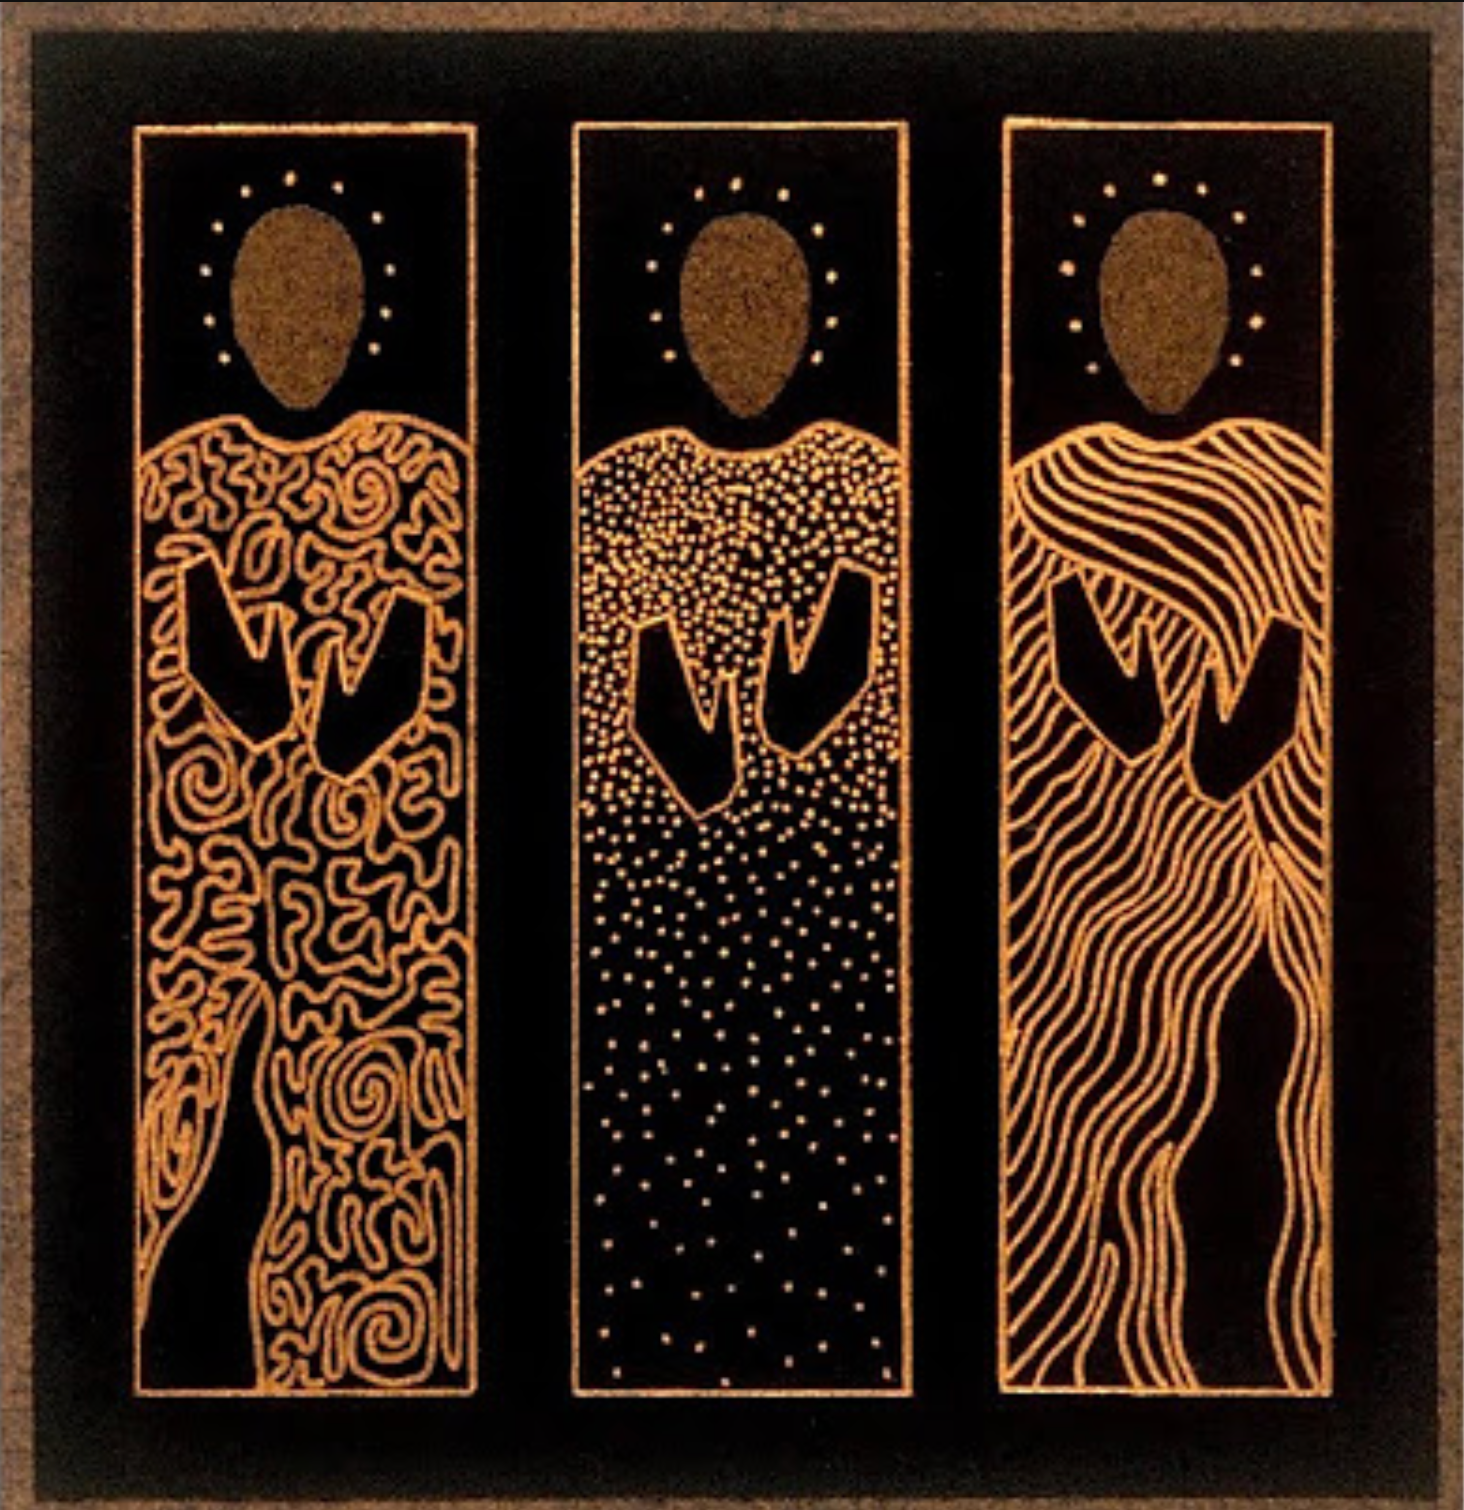 3 abstract people created out of gold lines, on a black background. Their hands are highlighted